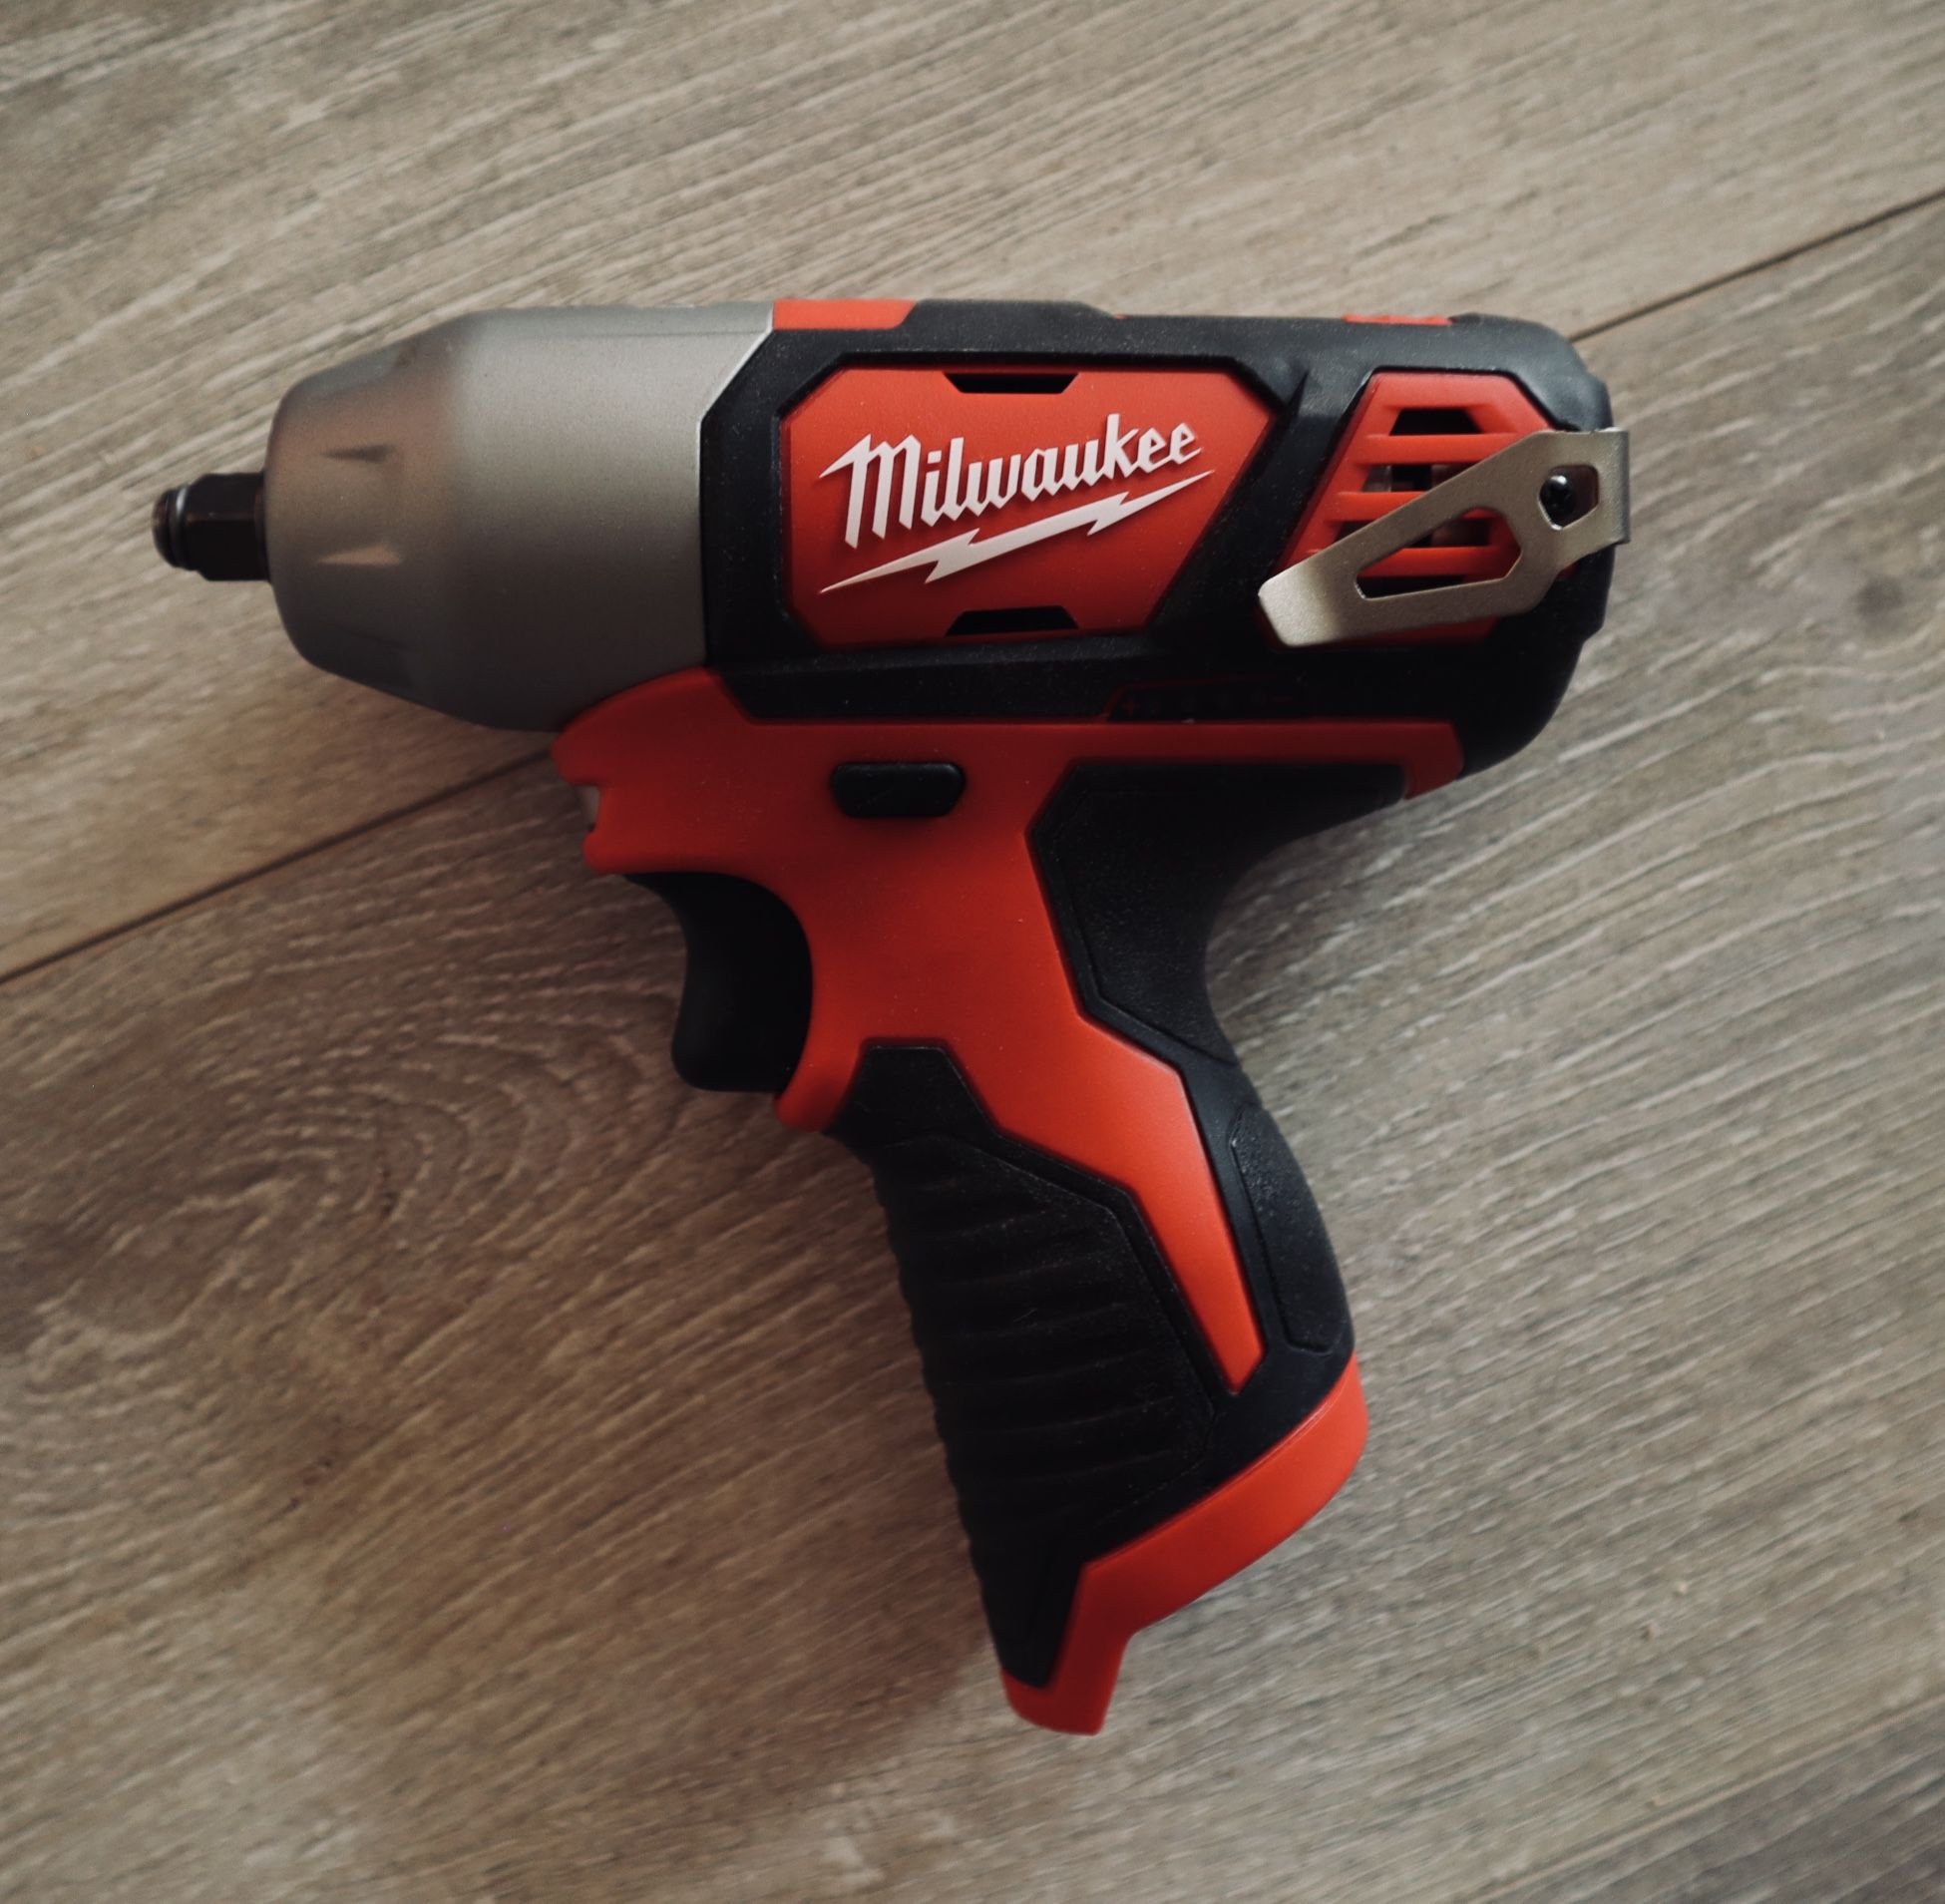 Milwaukee M12 3/8 Impact Wrench (Tool Only)